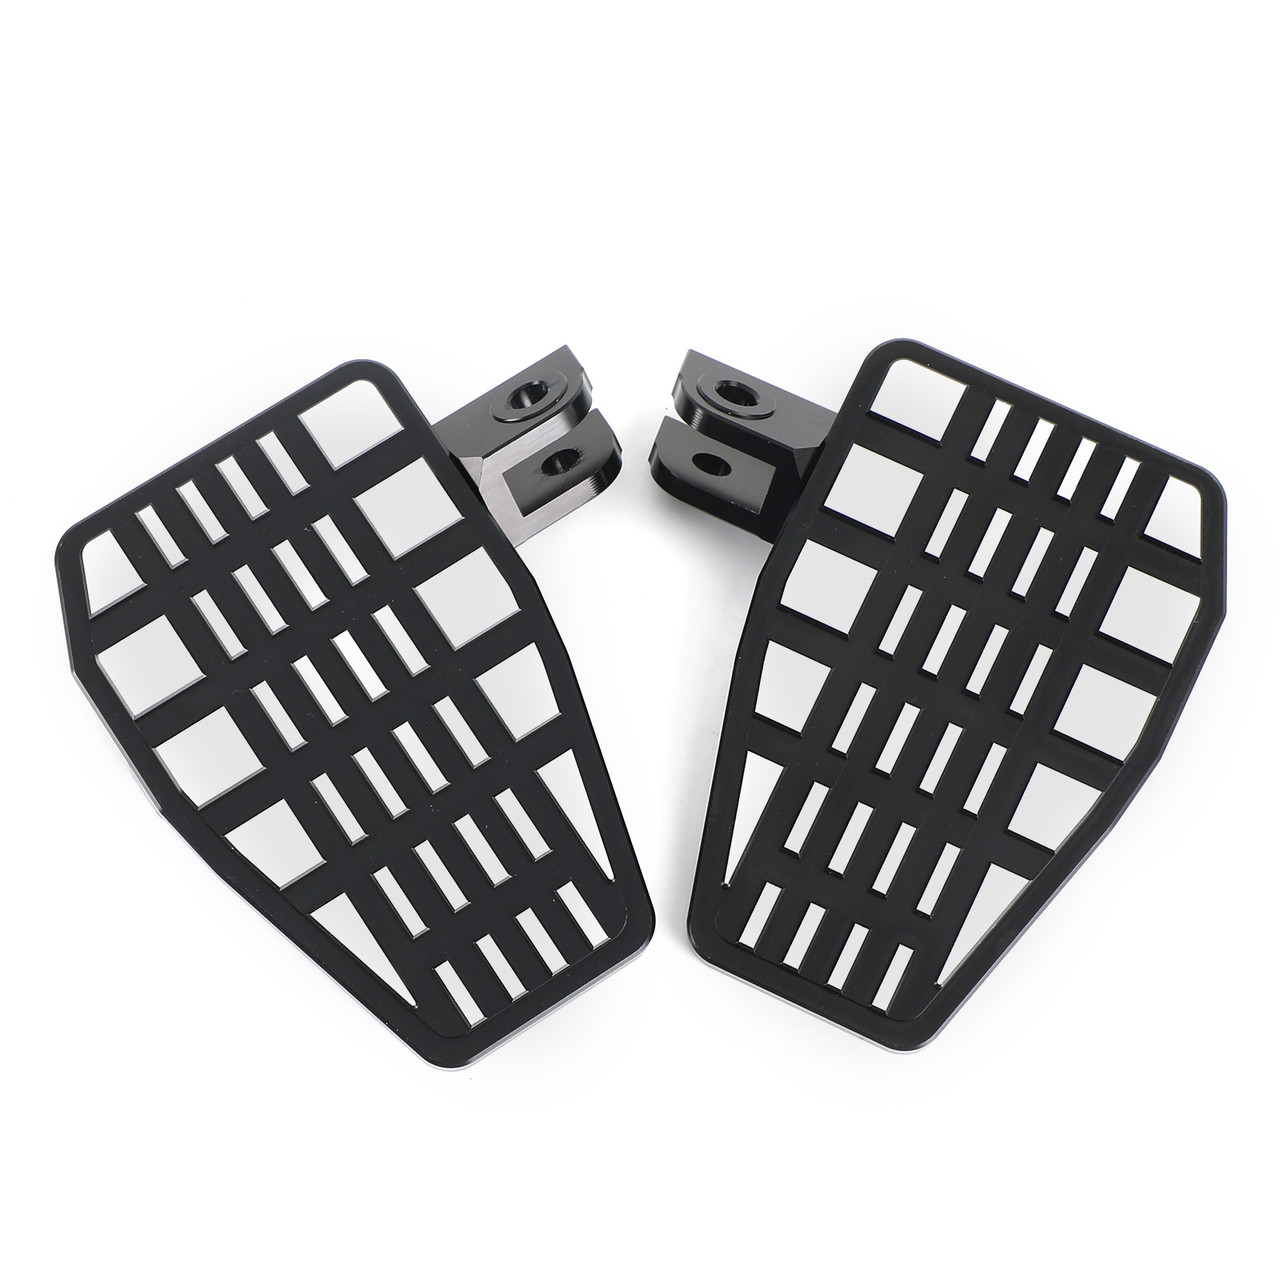 Front Foot Pegs Rest Pedal Pad Footpegs fit for Honda CM1100 CMX1100 2021+ Black